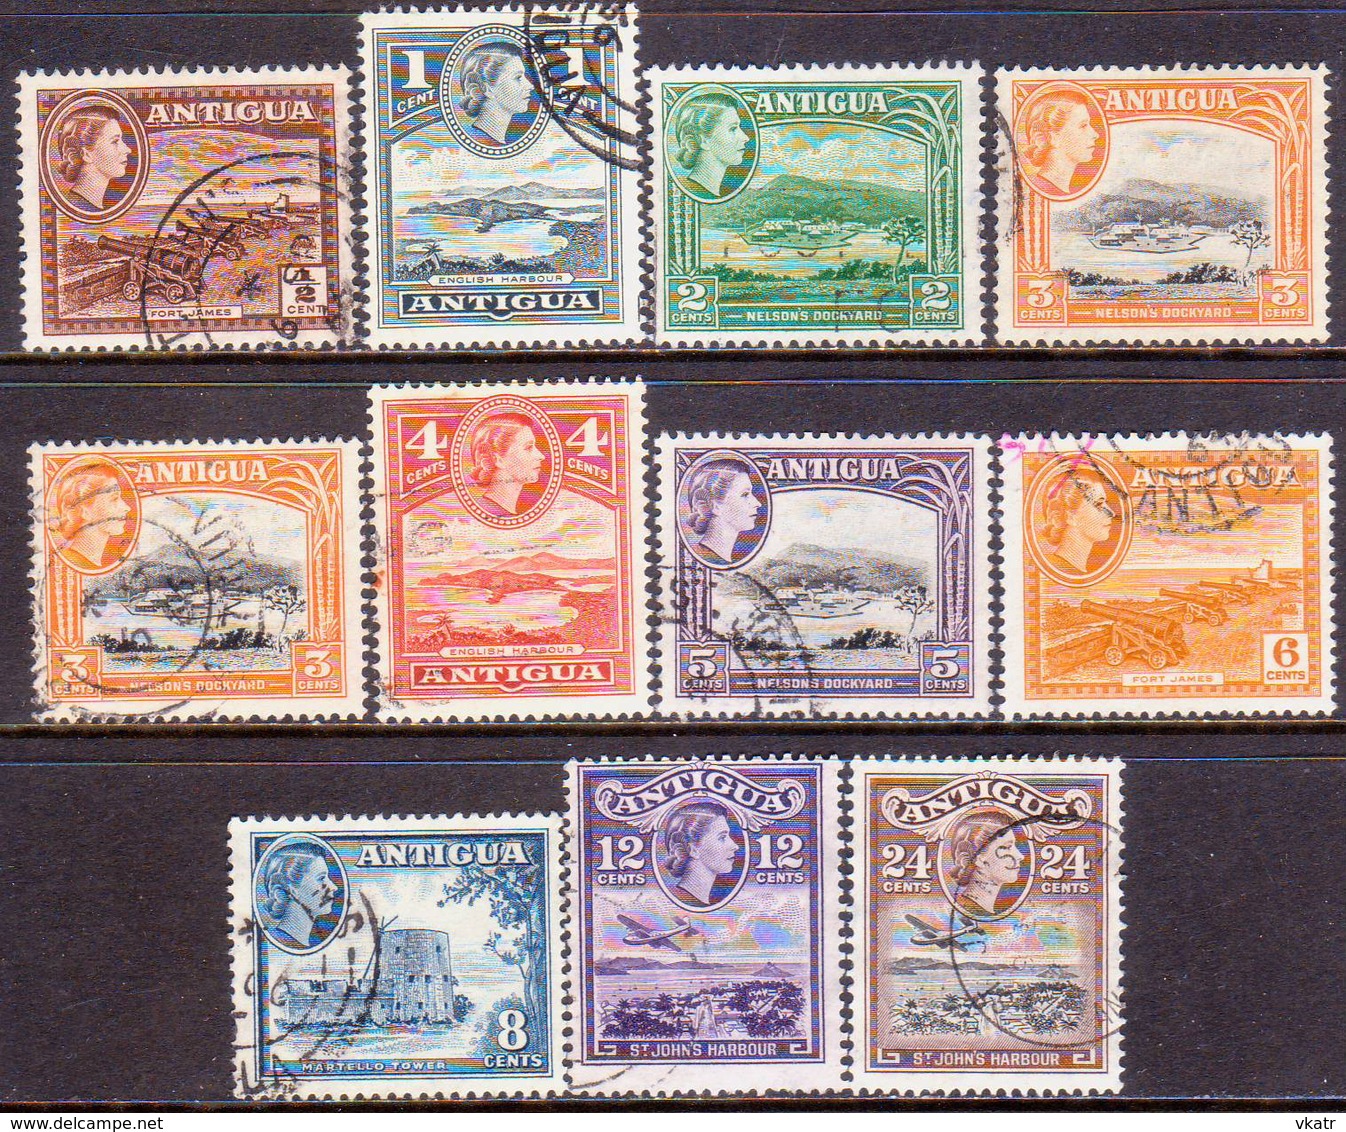 ANTIGUA 1963-65 SG #149-58 Compl.set Incl. Not Listed Colour Var For 3c Used Wmk Mult.Block CA - 1960-1981 Ministerial Government